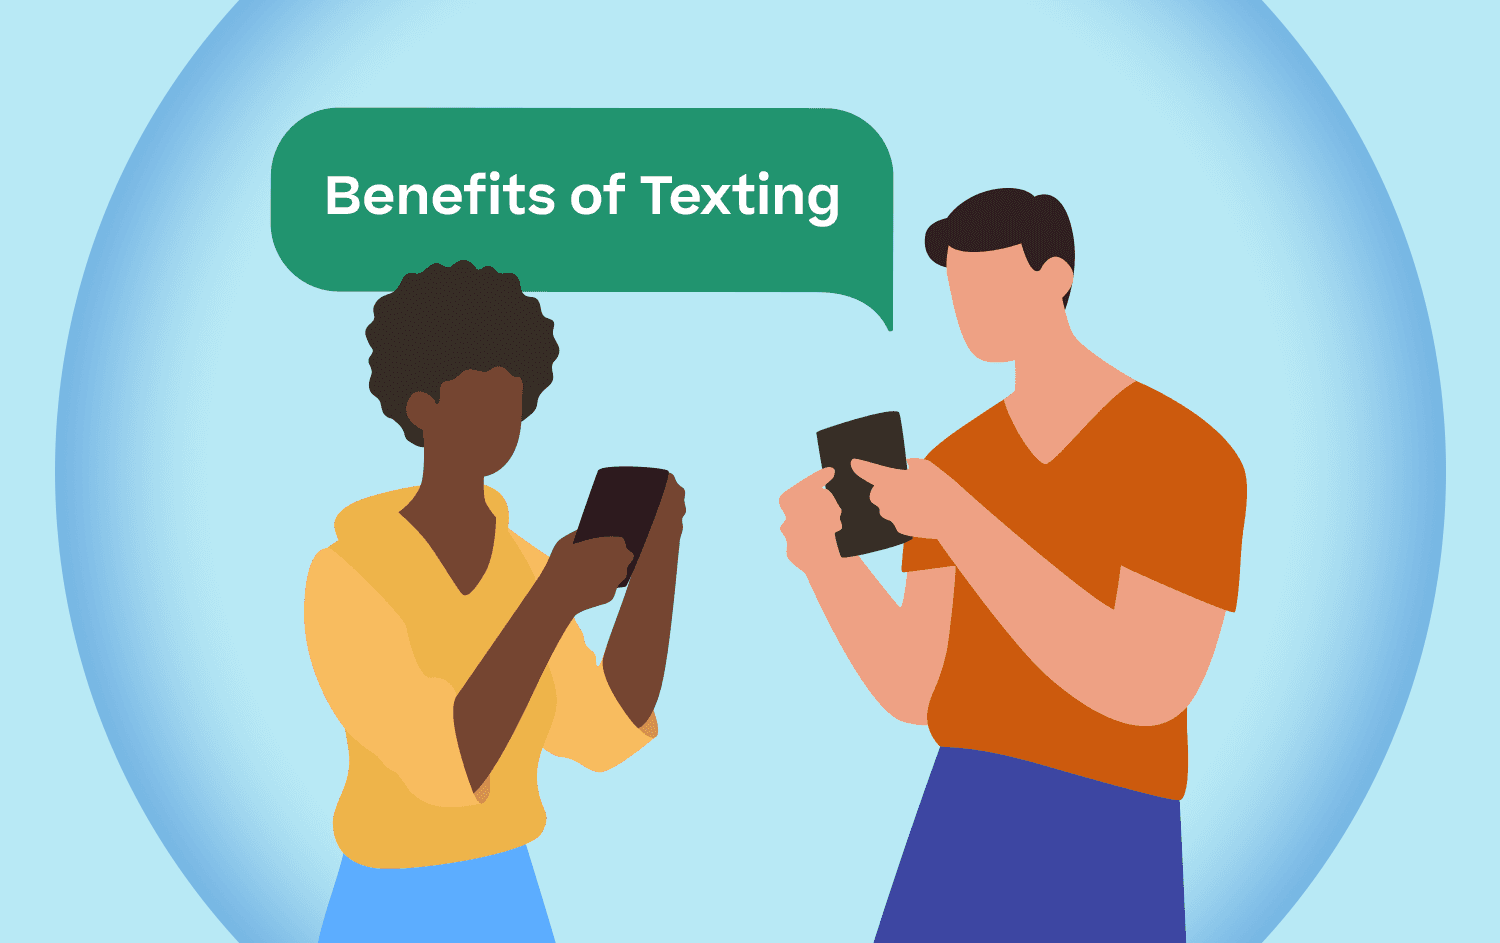 Cartoon representation of people texting and a text bubble that says Benefits of Texting